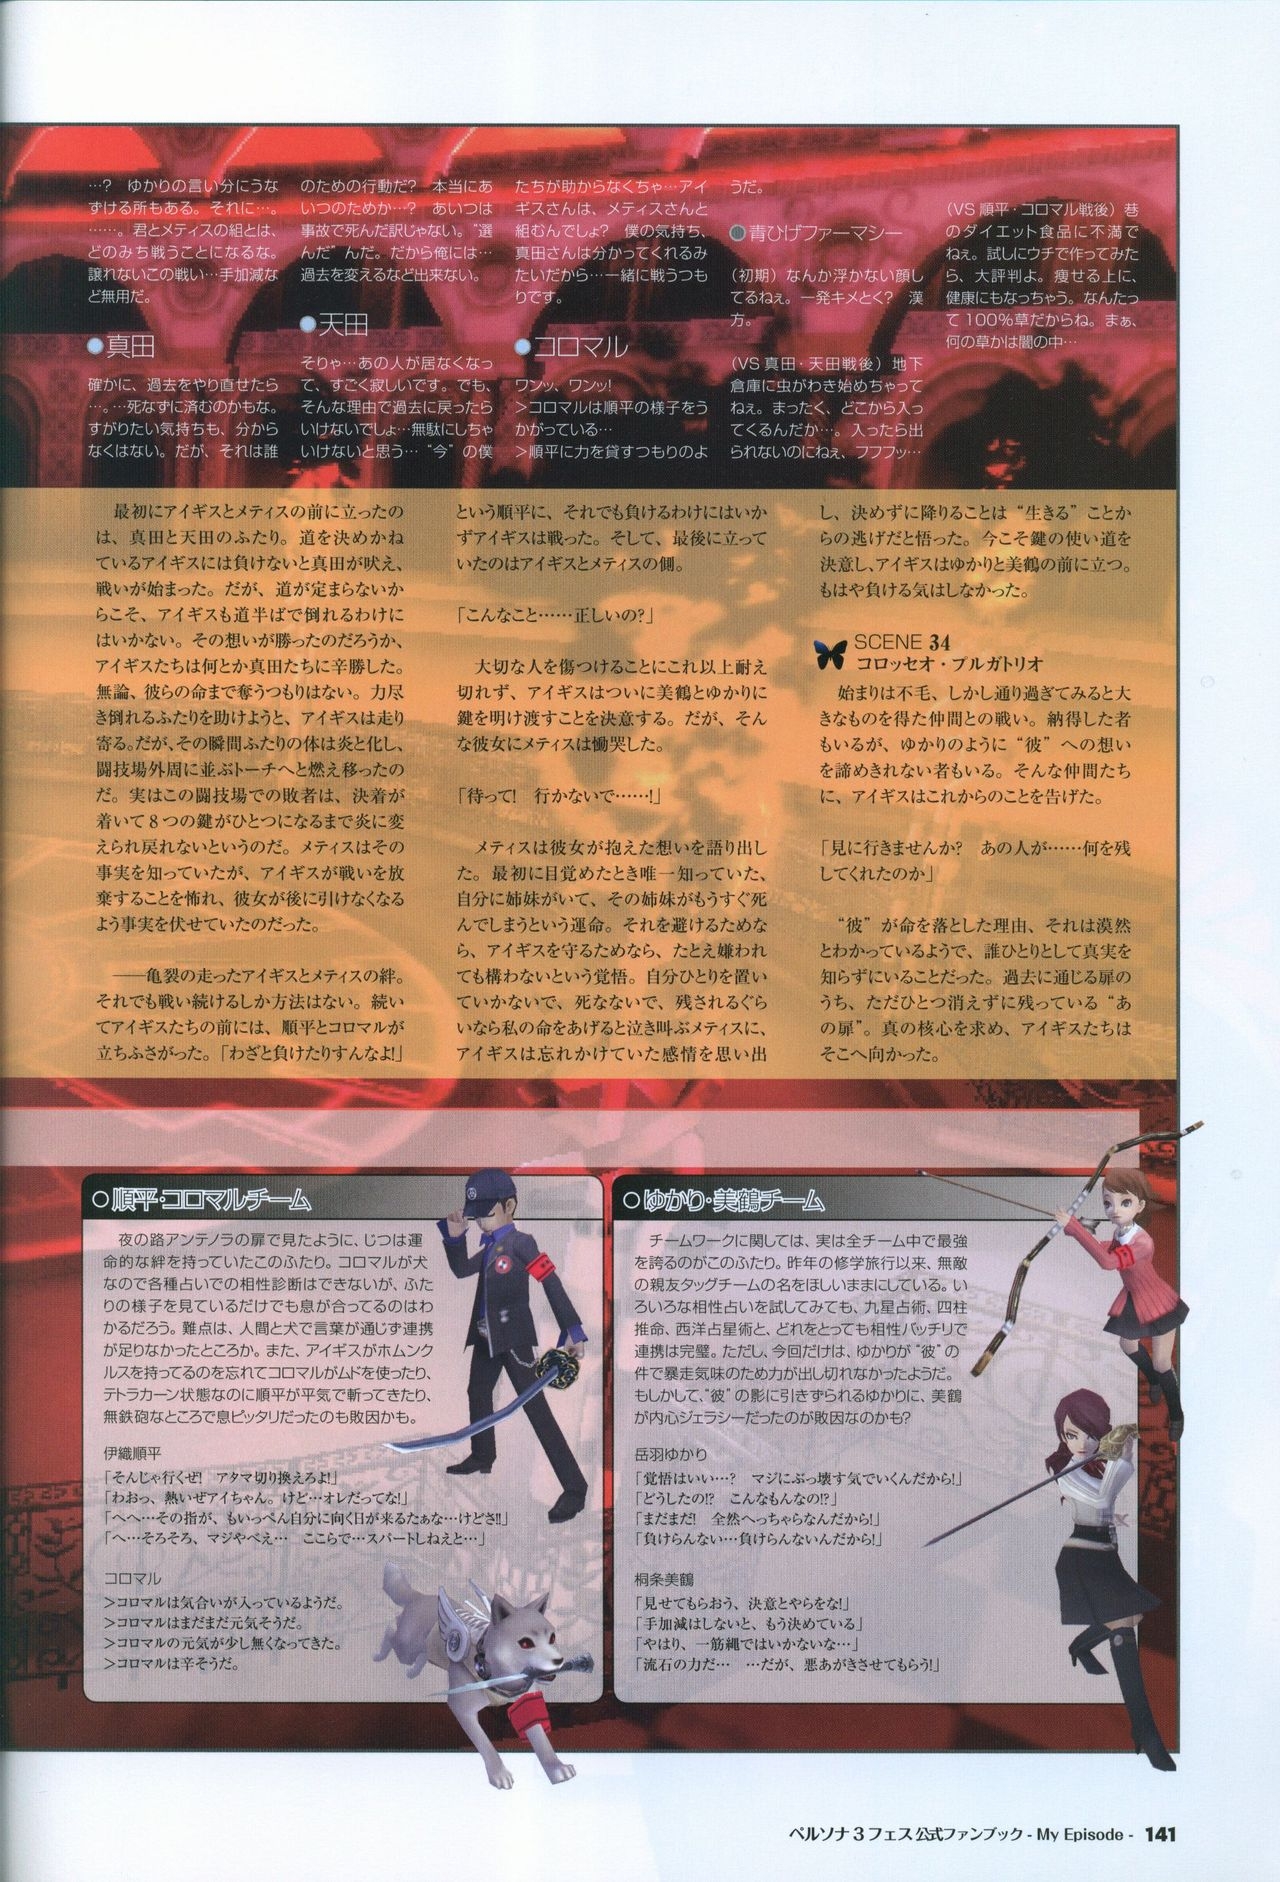 Persona 3 Fes Official Fan Book -My Episode- 142